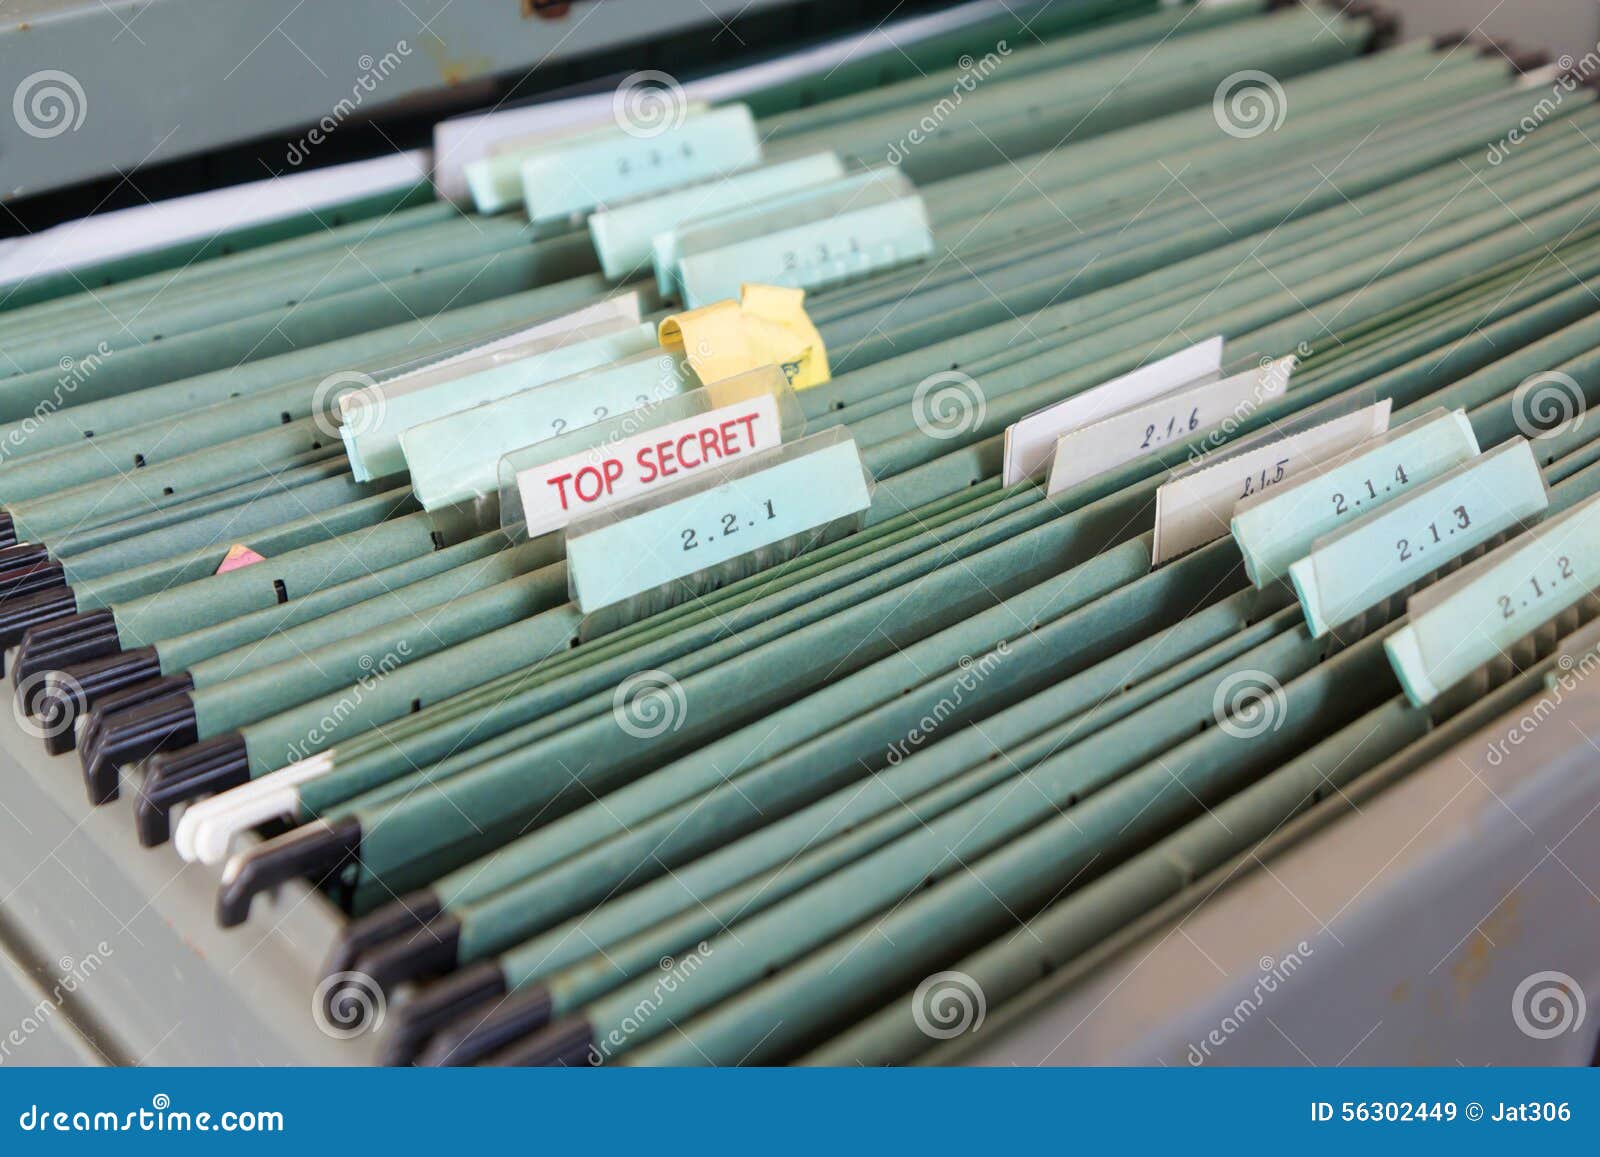 File Folders In A Filing Cabinet Stock Image Image Of Cabinet